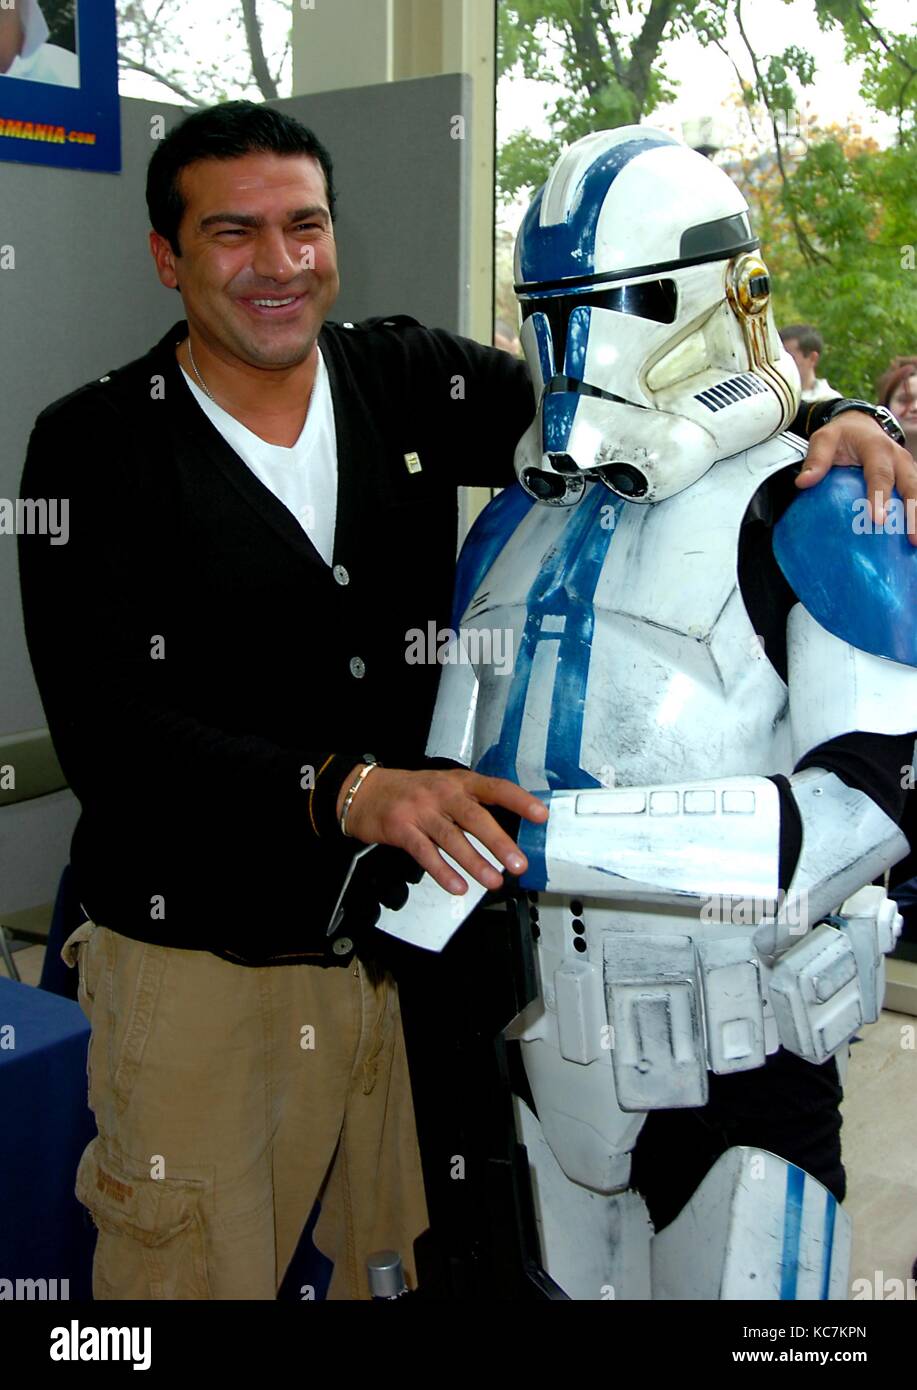 COLLERCORMANIA 12 AT THE CENTER MK TAMMER HASSAN AND DANNY DYER WERE THERE TAMER WAS GETTING FAR TO FRIENDLY WITH THE STORM TROOPERS AND DANNY WAS THREE HOURS LATE HE STAYED TILL HE MET EVERY ONE OF HIS FANS AND WAS REMOVED FROM THE CENTRE BY SECURTY AND THE END OF THE DAY.PHOTOS PETR KRIZAM Stock Photo